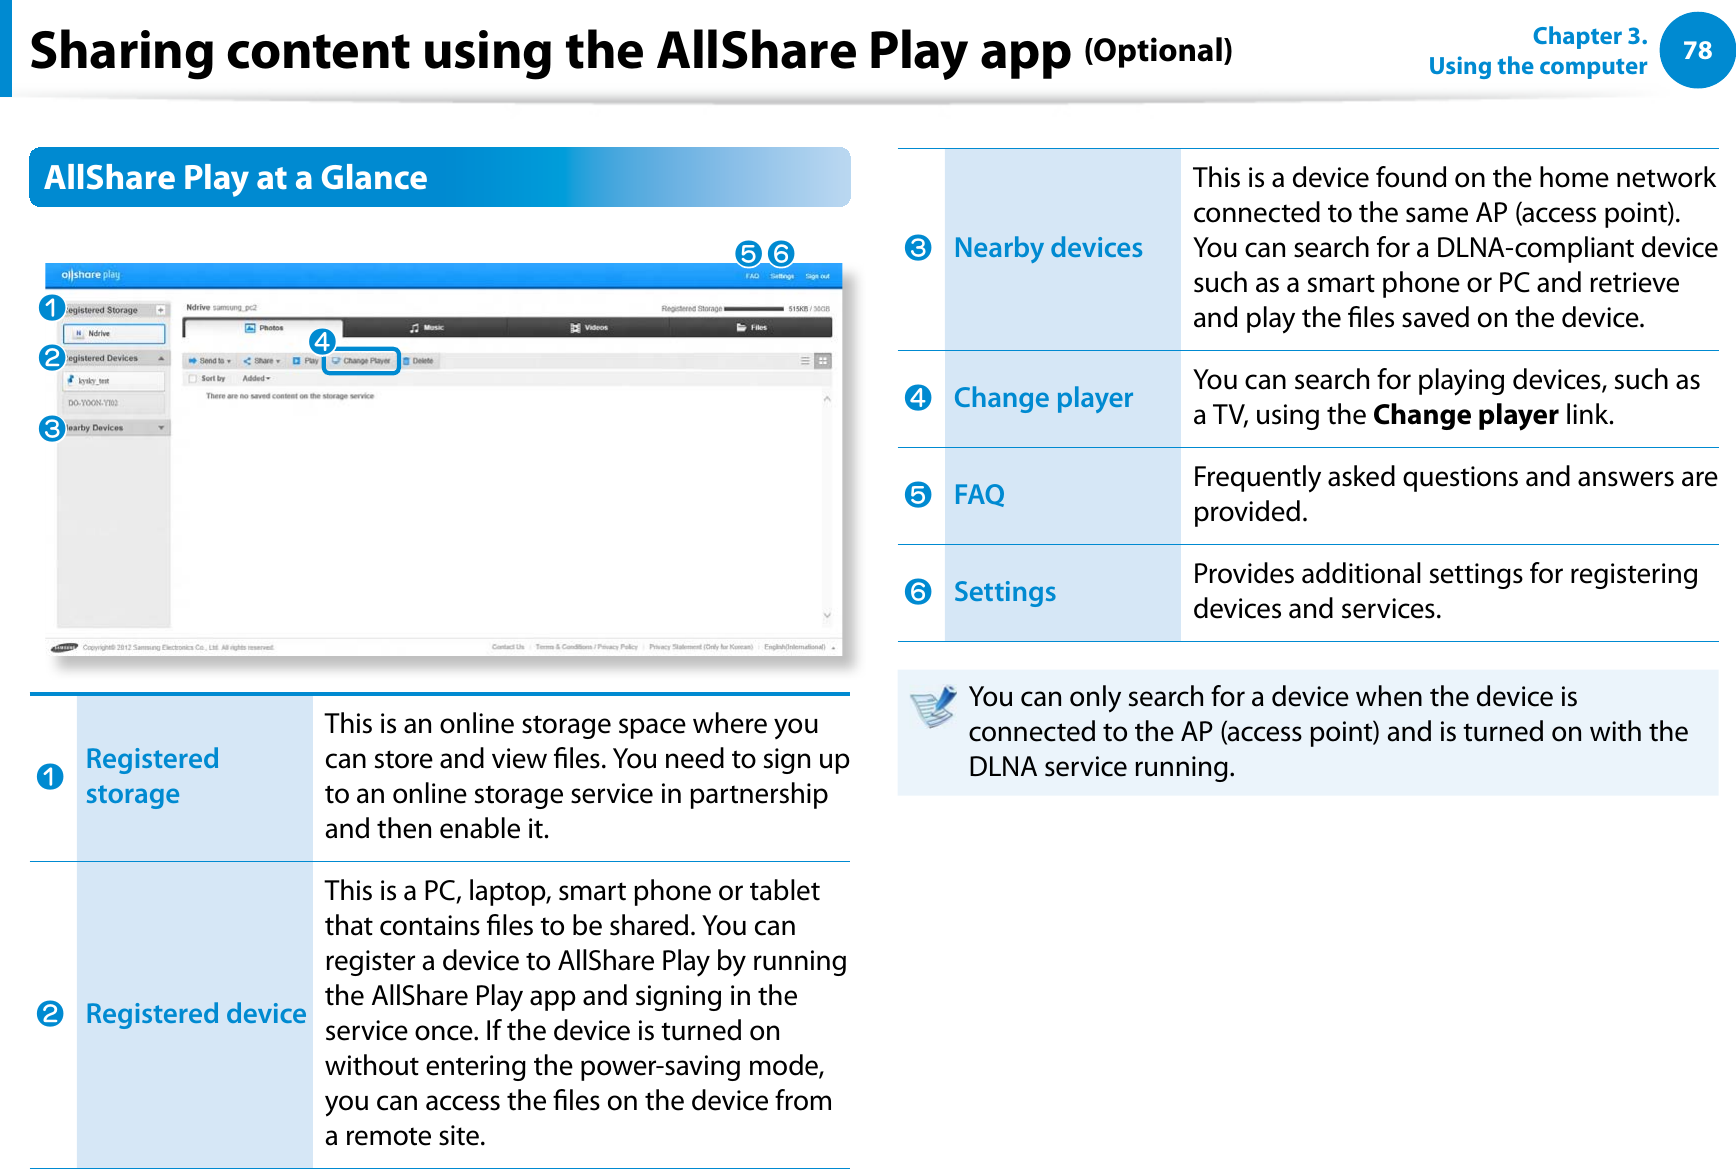 78Chapter 3.  Using the computerSharing content using the AllShare Play app (Optional)AllShare Play at a GlancenlWjVbnRegistered storageThis is an online storage space where you can store and view les. You need to sign up to an online storage service in partnership and then enable it.lRegistered deviceThis is a PC, laptop, smart phone or tablet that contains les to be shared. You can register a device to AllShare Play by running the AllShare Play app and signing in the service once. If the device is turned on without entering the power-saving mode, you can access the les on the device from a remote site.WNearby devices This is a device found on the home network connected to the same AP (access point). You can search for a DLNA-compliant device such as a smart phone or PC and retrieve and play the les saved on the device.jChange player You can search for playing devices, such as a TV, using the Change player link.VFAQ Frequently asked questions and answers are provided.bSettings Provides additional settings for registering devices and services. You can only search for a device when the device is connected to the AP (access point) and is turned on with the DLNA service running.